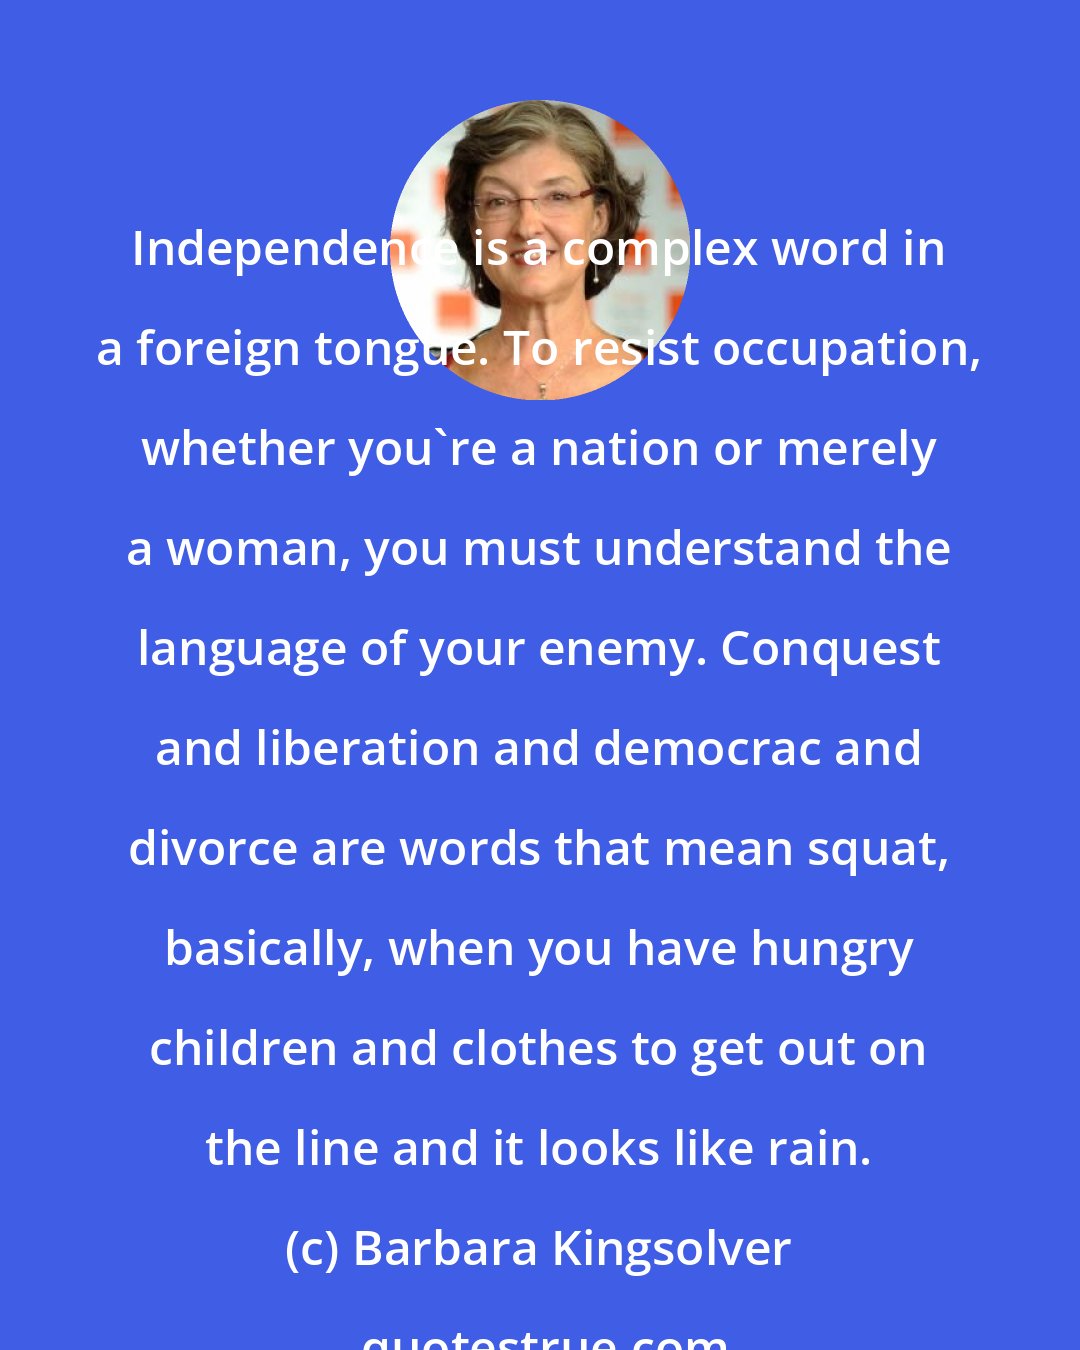 Barbara Kingsolver: Independence is a complex word in a foreign tongue. To resist occupation, whether you're a nation or merely a woman, you must understand the language of your enemy. Conquest and liberation and democrac and divorce are words that mean squat, basically, when you have hungry children and clothes to get out on the line and it looks like rain.